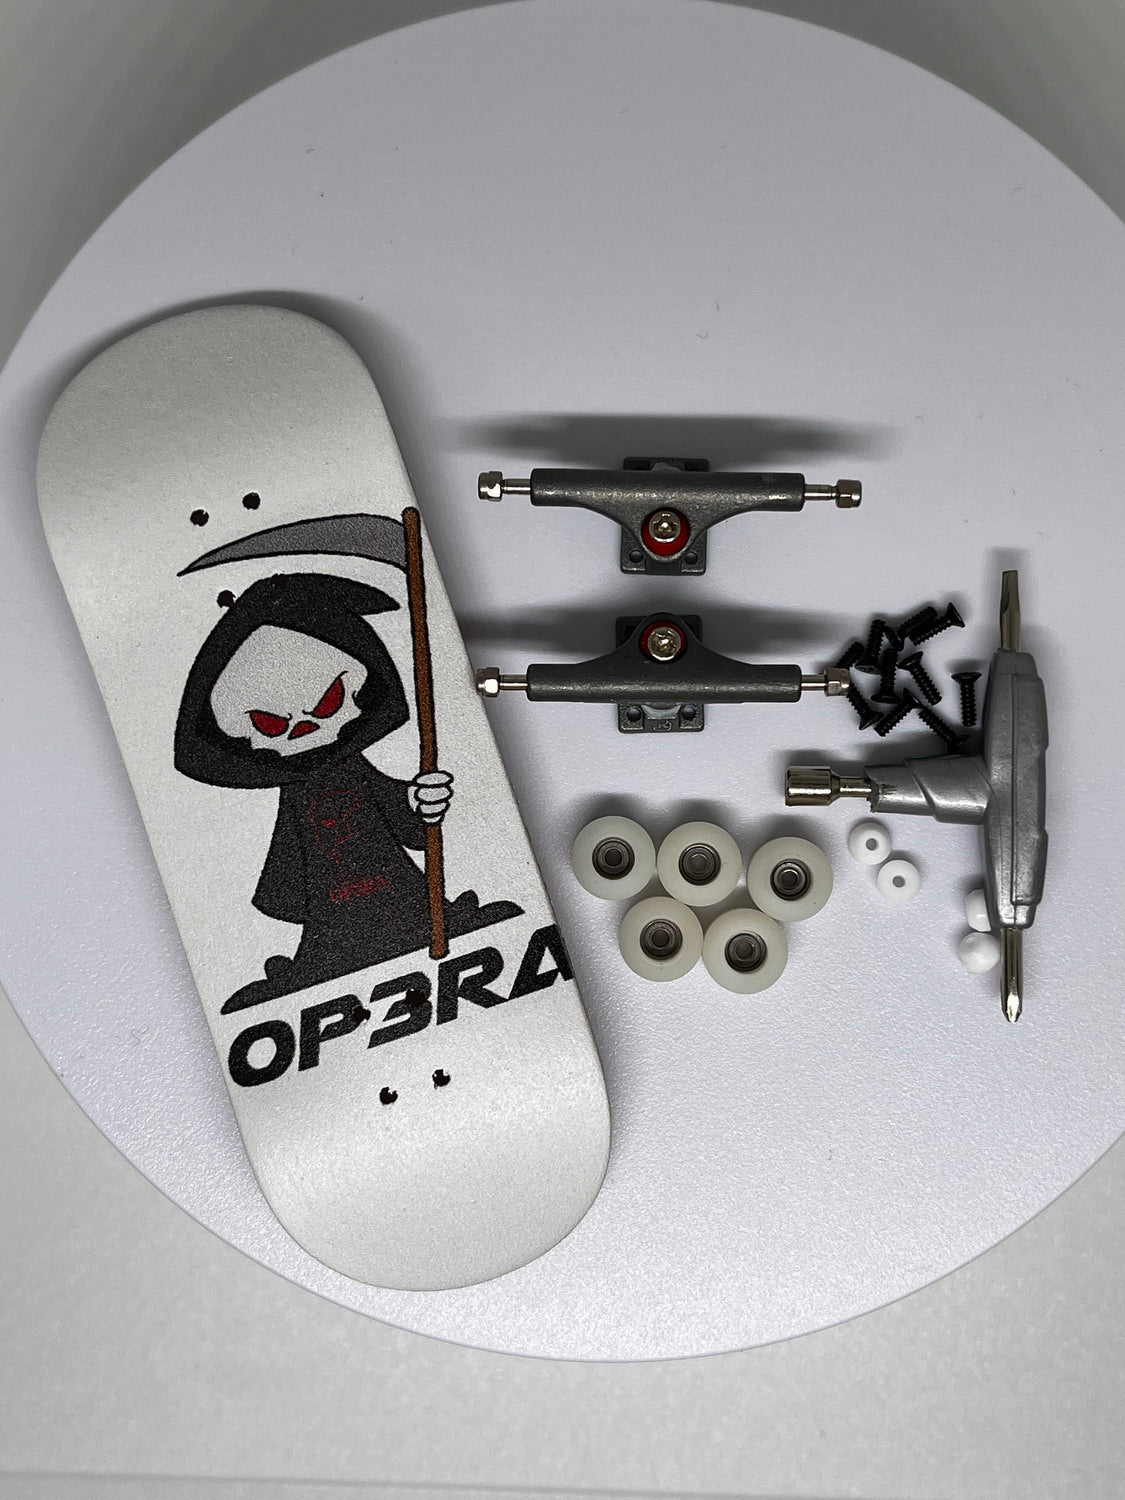 Op3ra Pro Fingerboard Complete 34 * 96mm - The Grim Edition